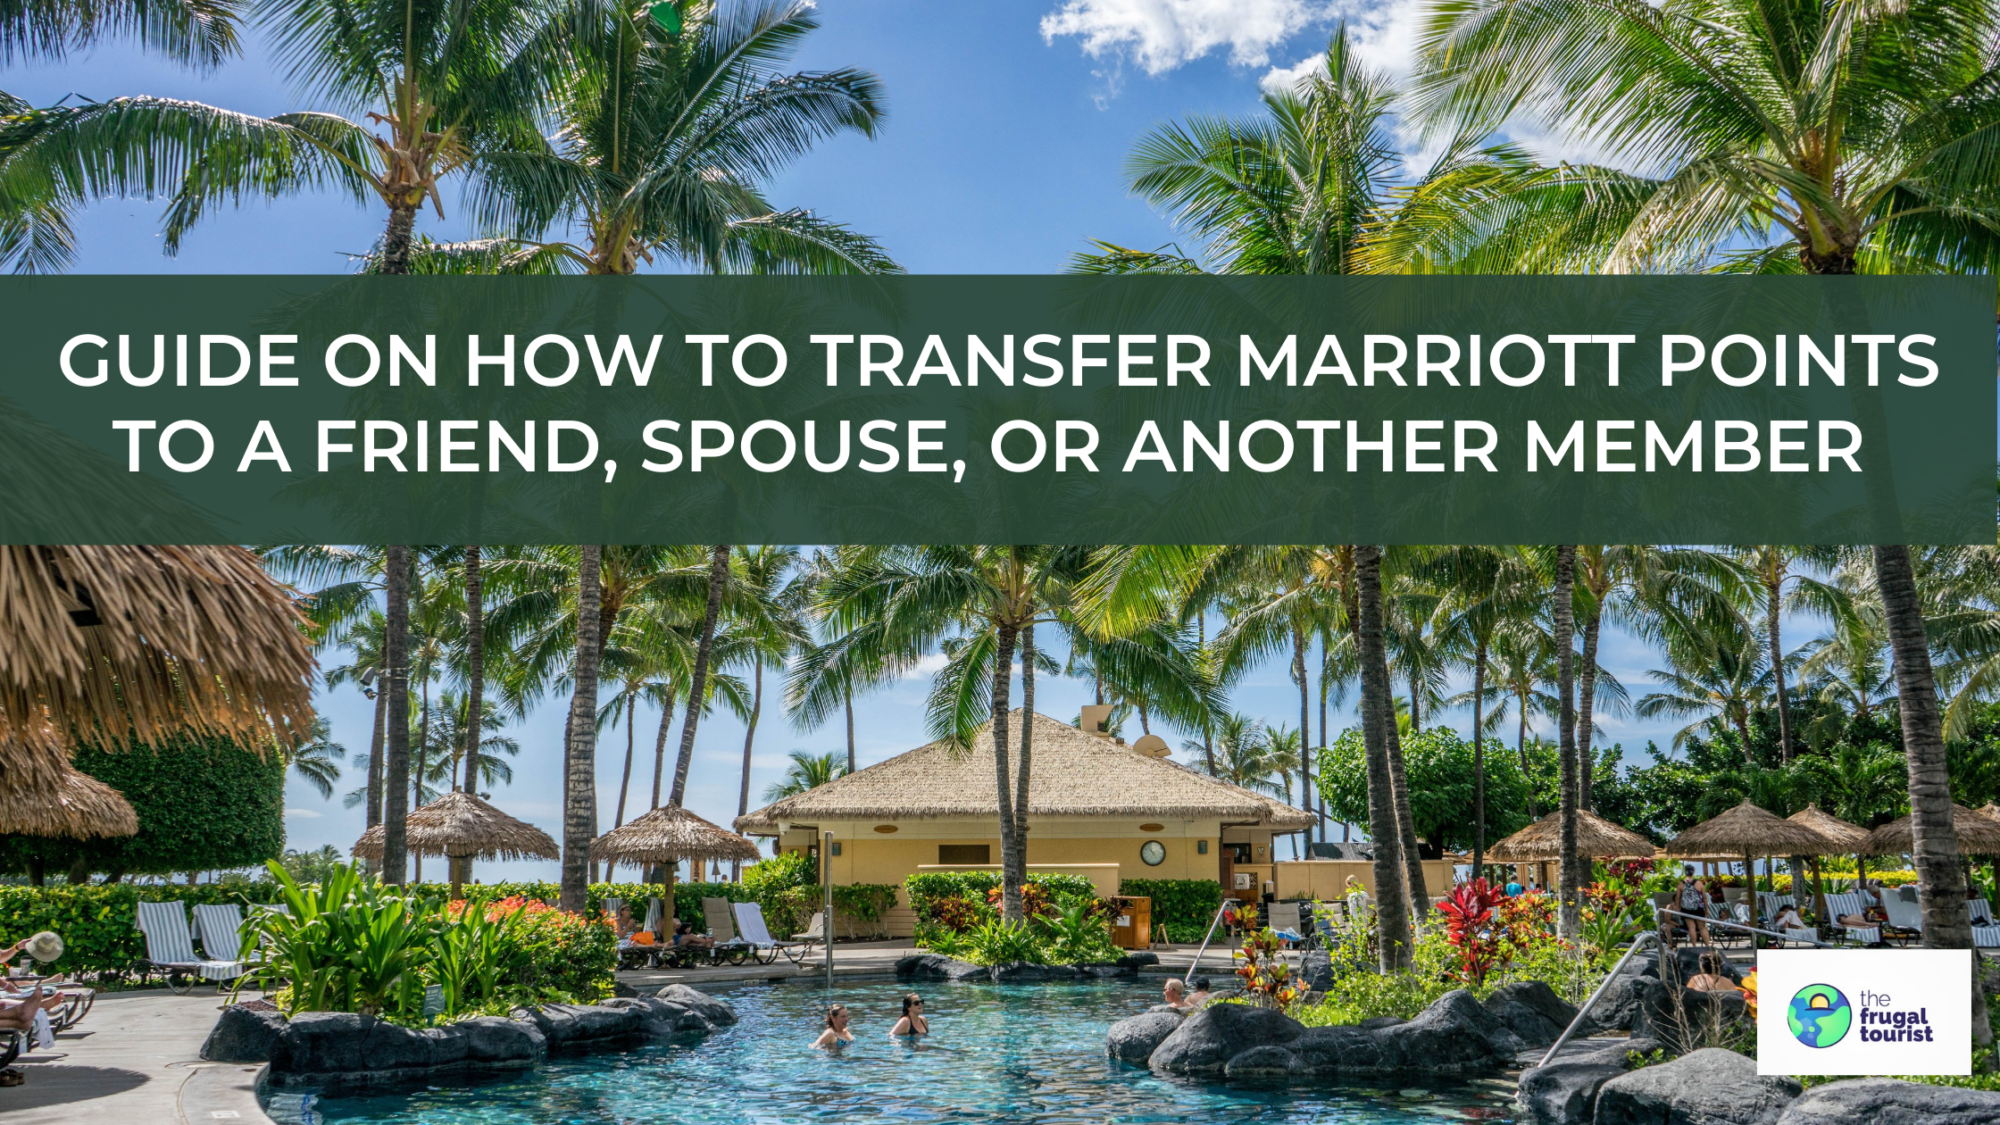 Guide on How To Transfer Marriott Points to a Friend, Spouse, or Another Member (2022)